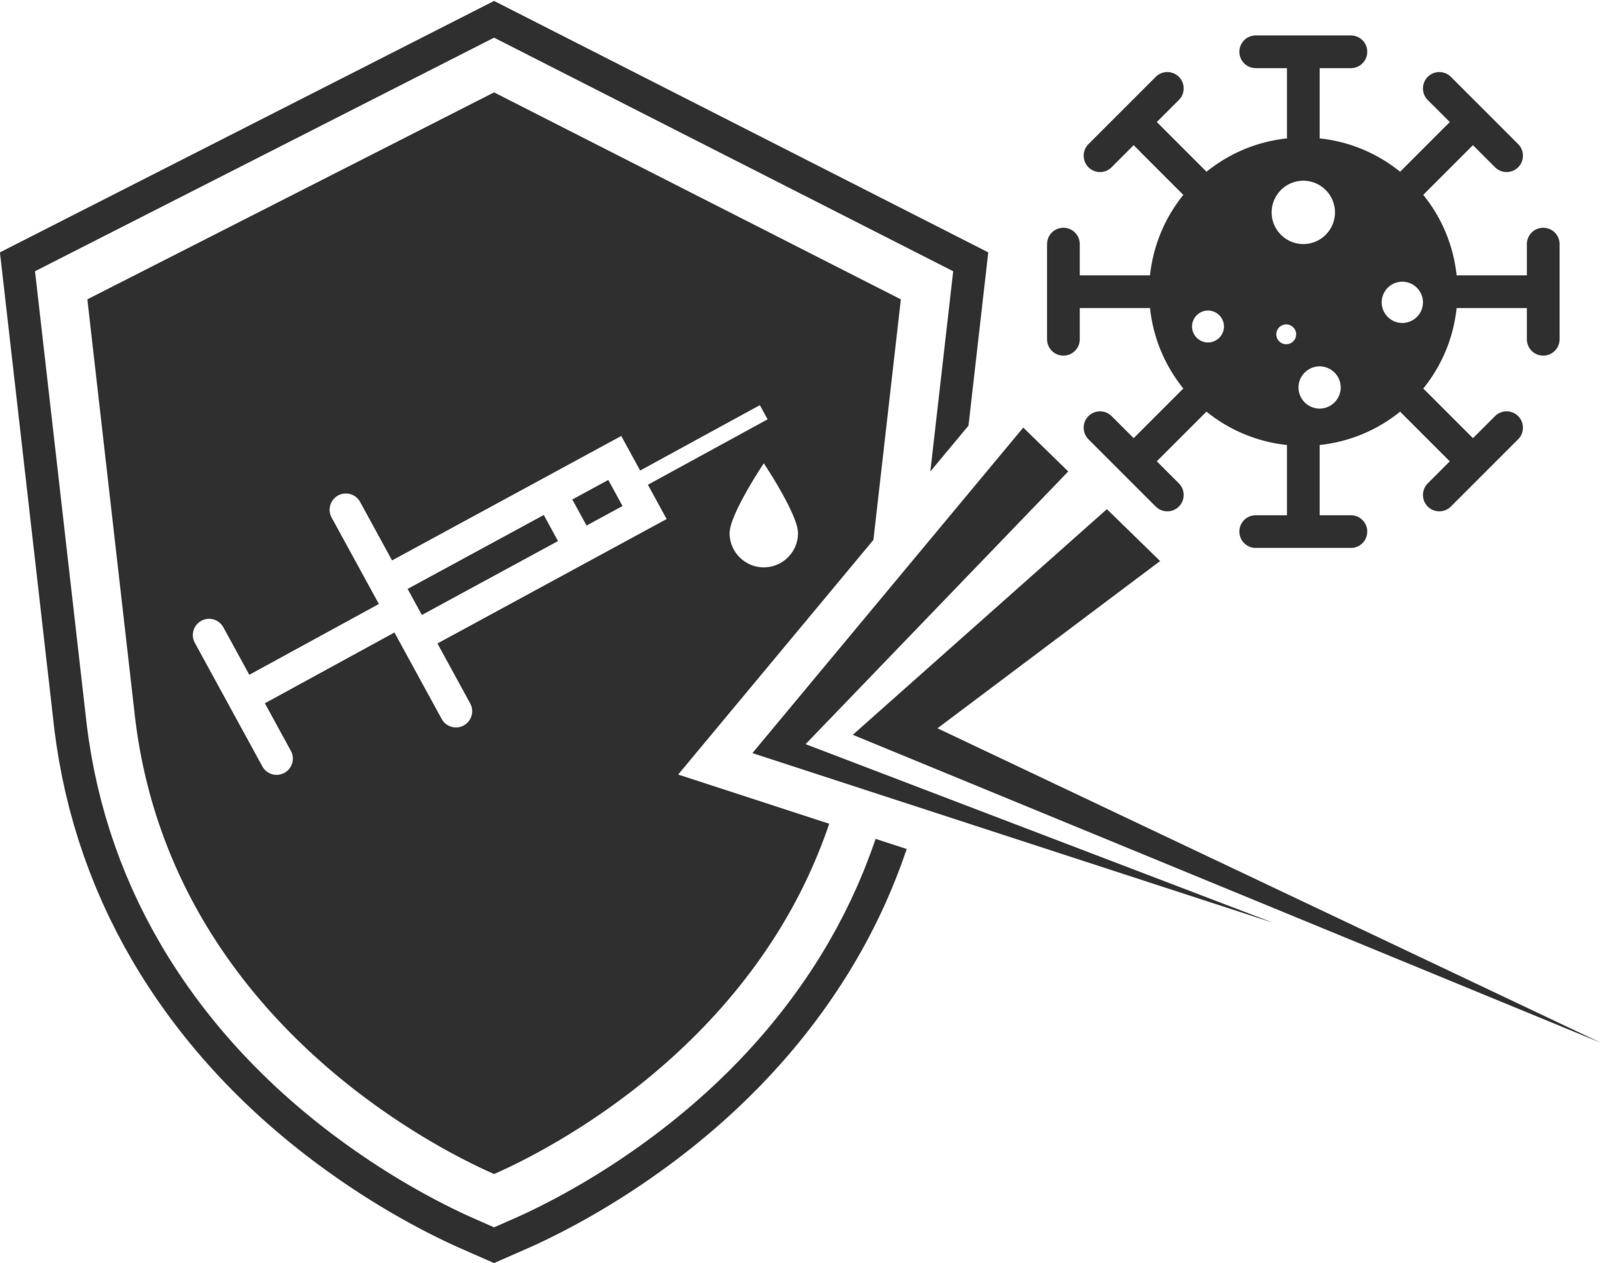 Virus protection icon in black and white. Shield and syringe. vector illustration.